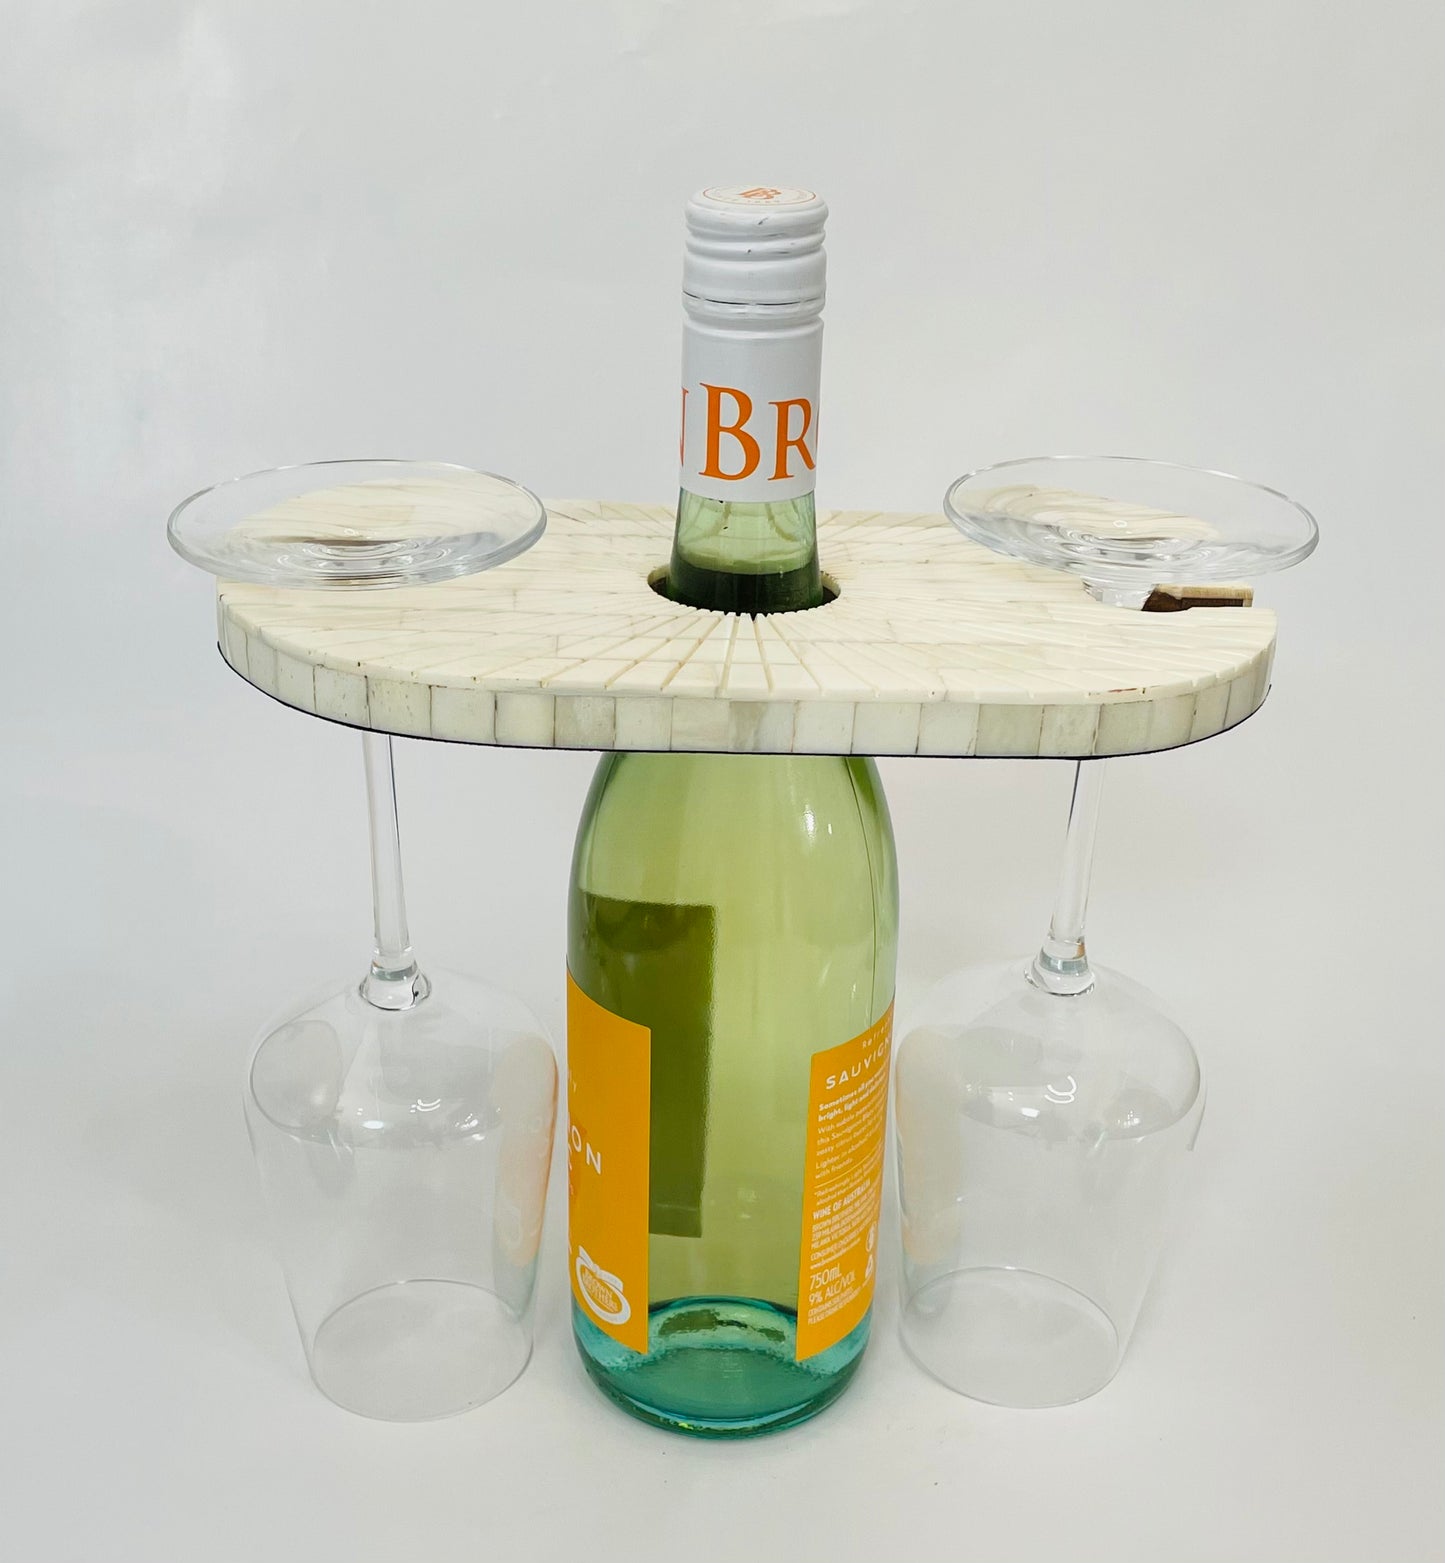 Wine glass caddy for two glasses